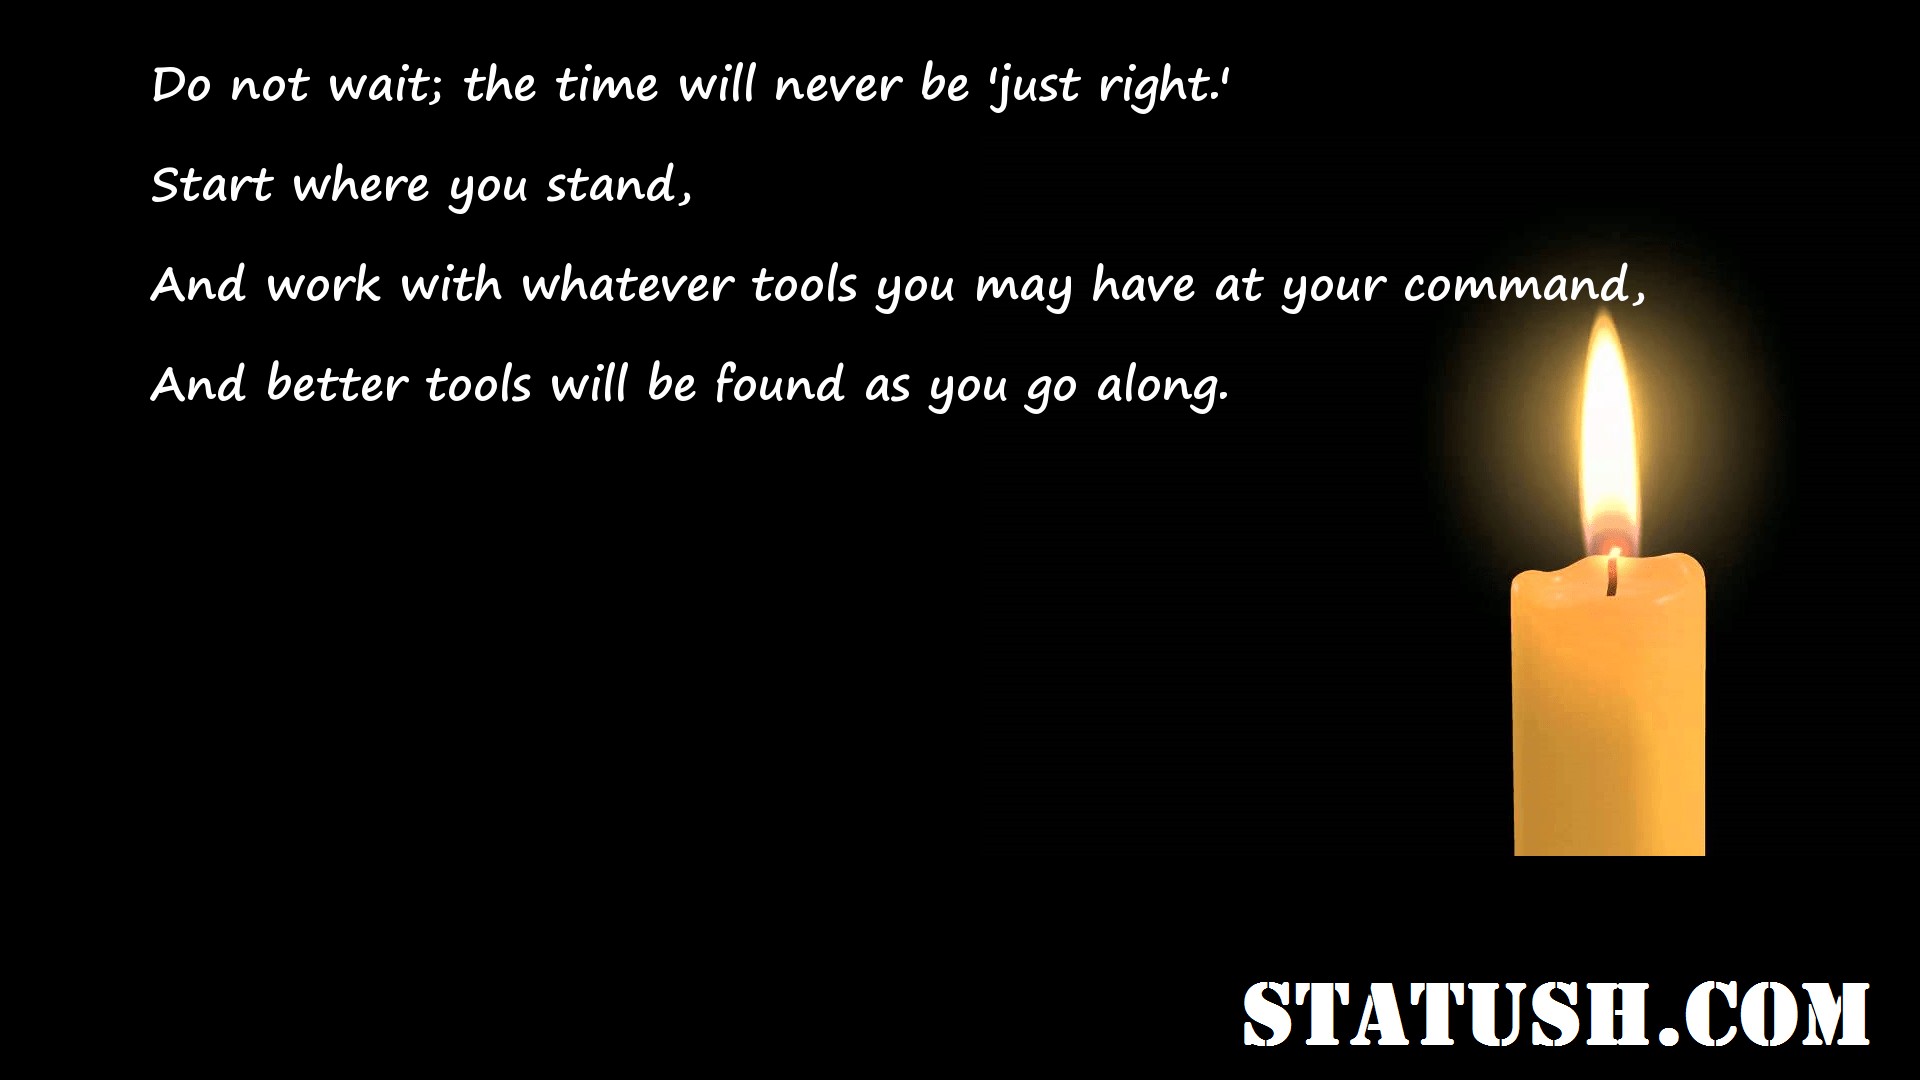 Do not wait the time will never be just right - Motivational Quotes at statush.com